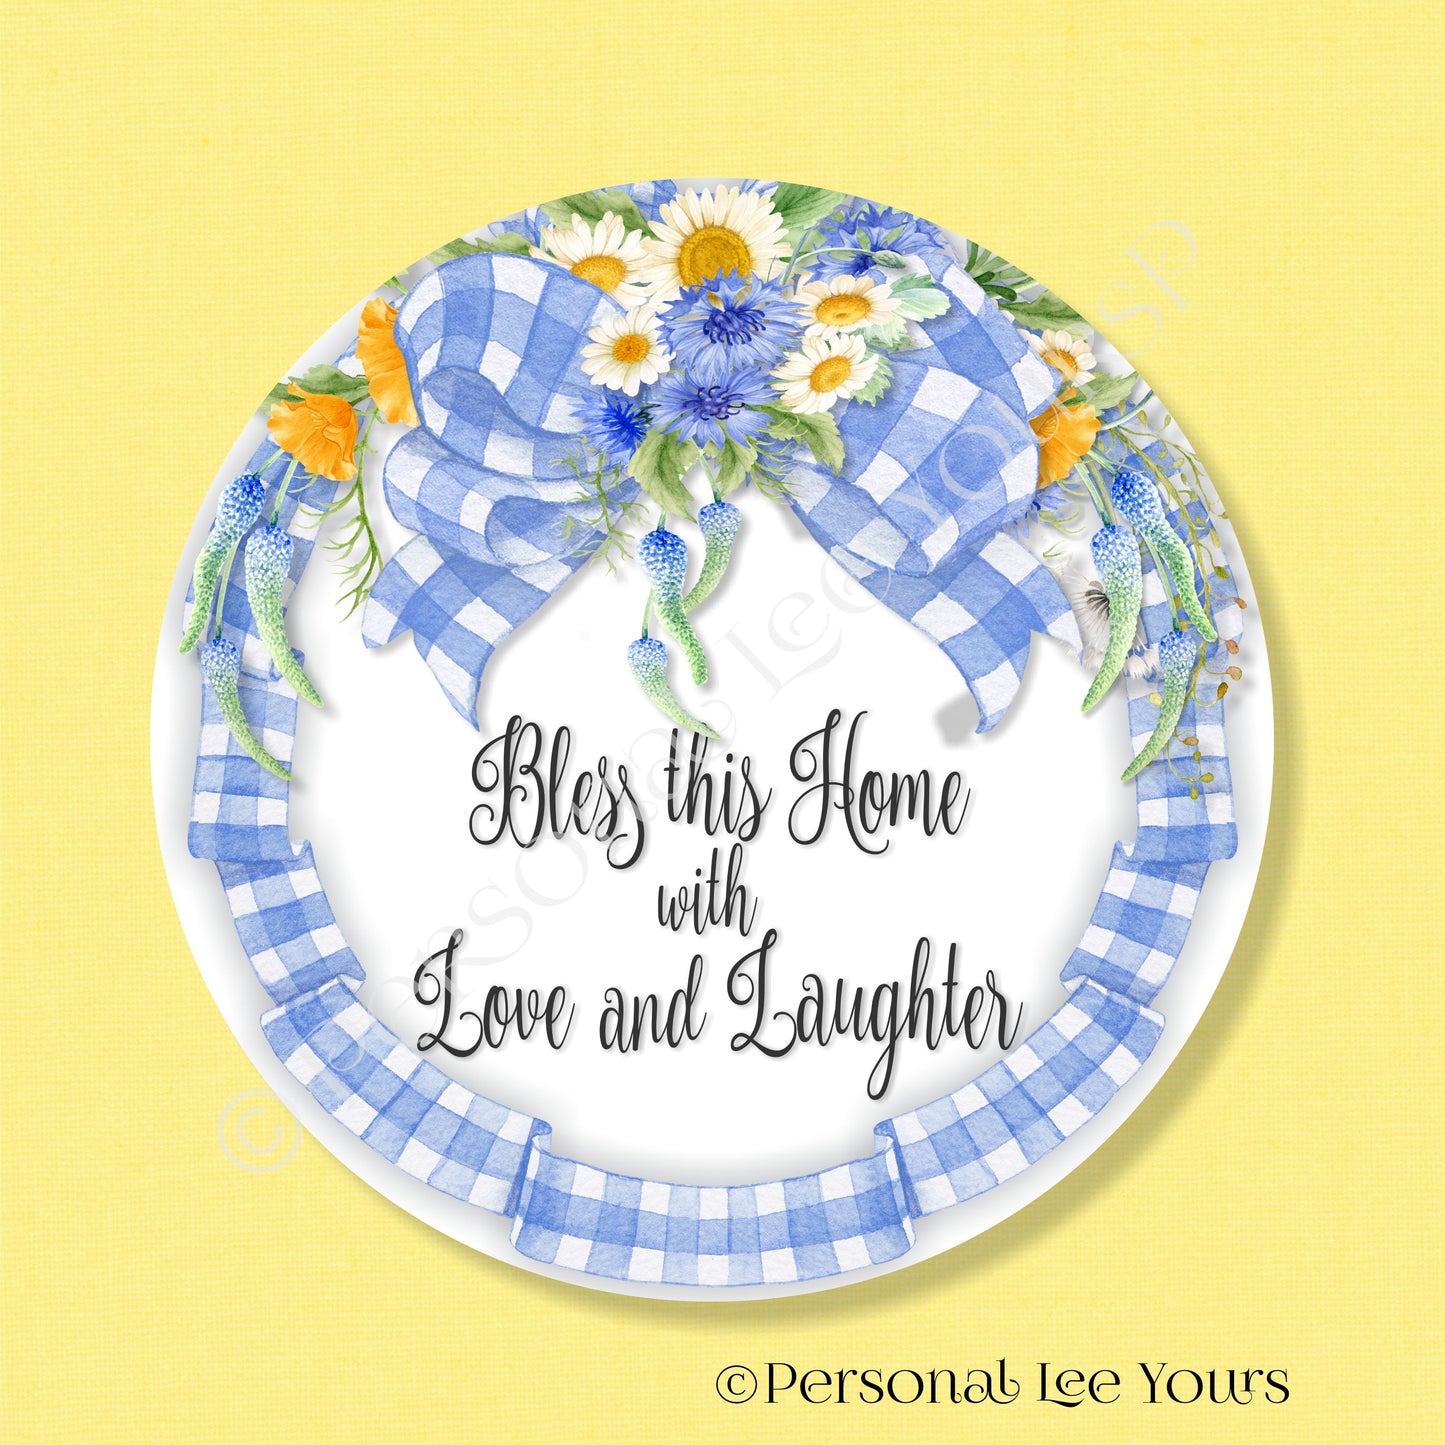 Metal Wreath Sign * Blue Bow * Bless This Home With Love and Laughter * Round * Lightweight